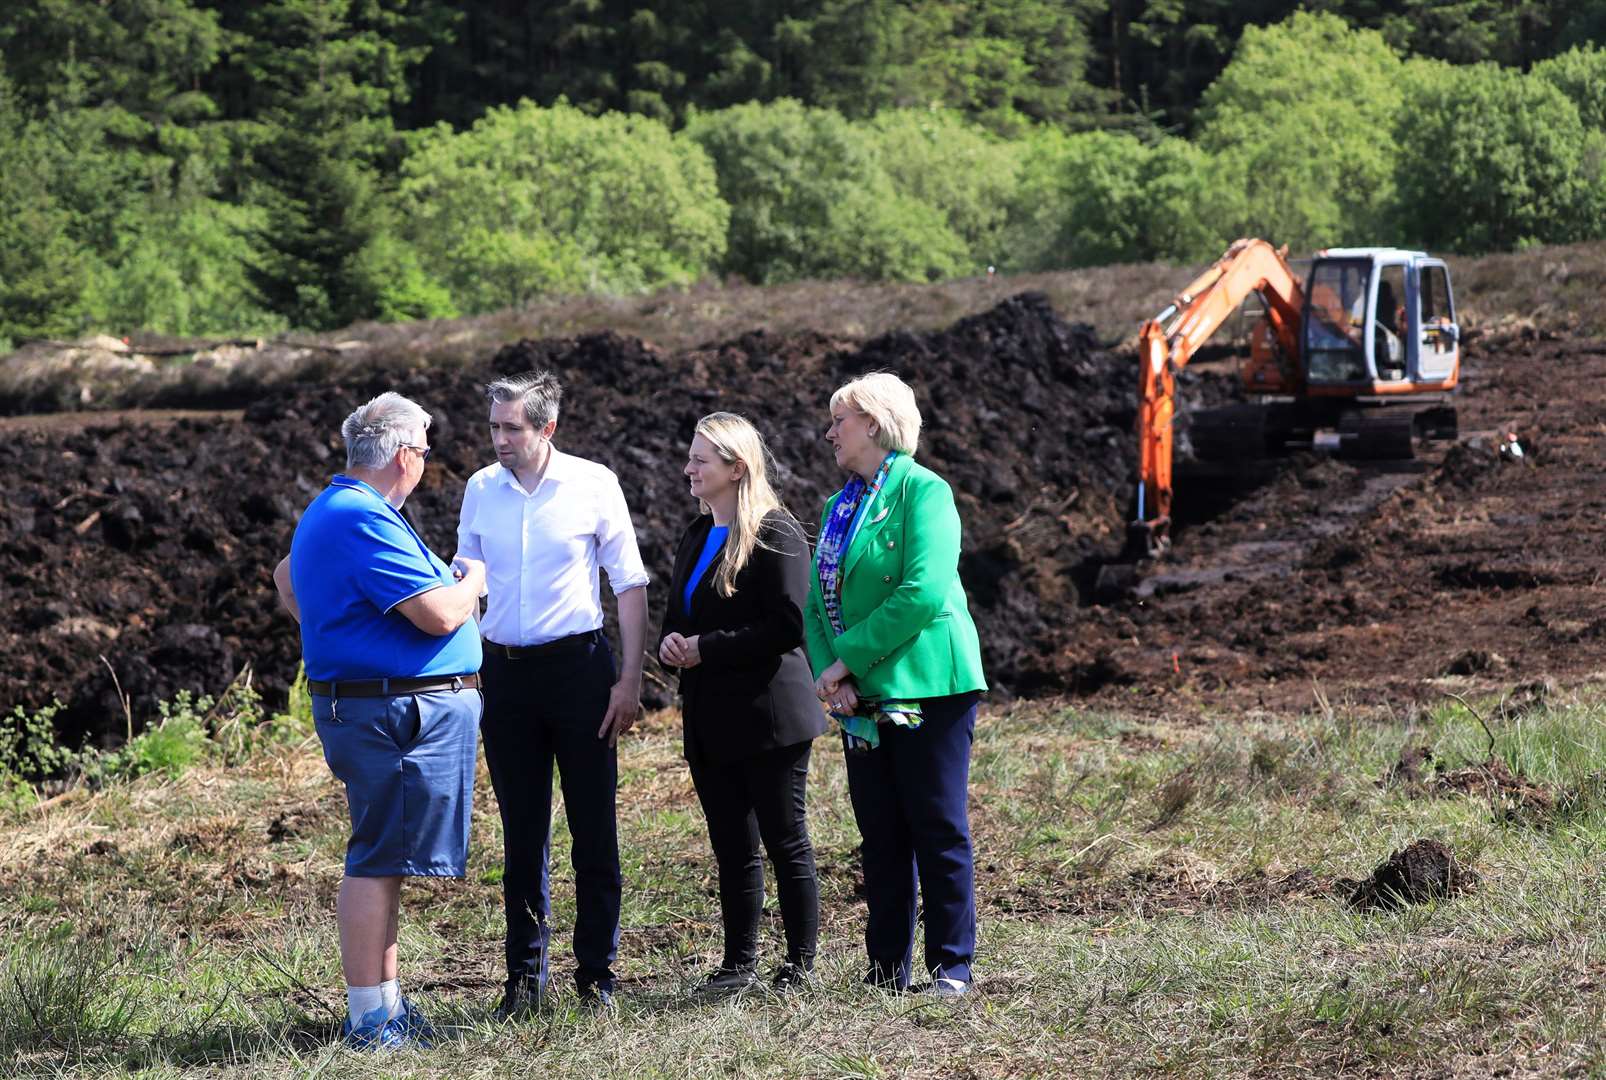 Minister of Justice Simon Harris, Senator Emer Currie and Minister for Social Protection Heather Humphreys with Oliver McVeigh, left, the brother of Columba McVeigh, at Bragan Bog in Co Monaghan (Peter Morrison/PA)